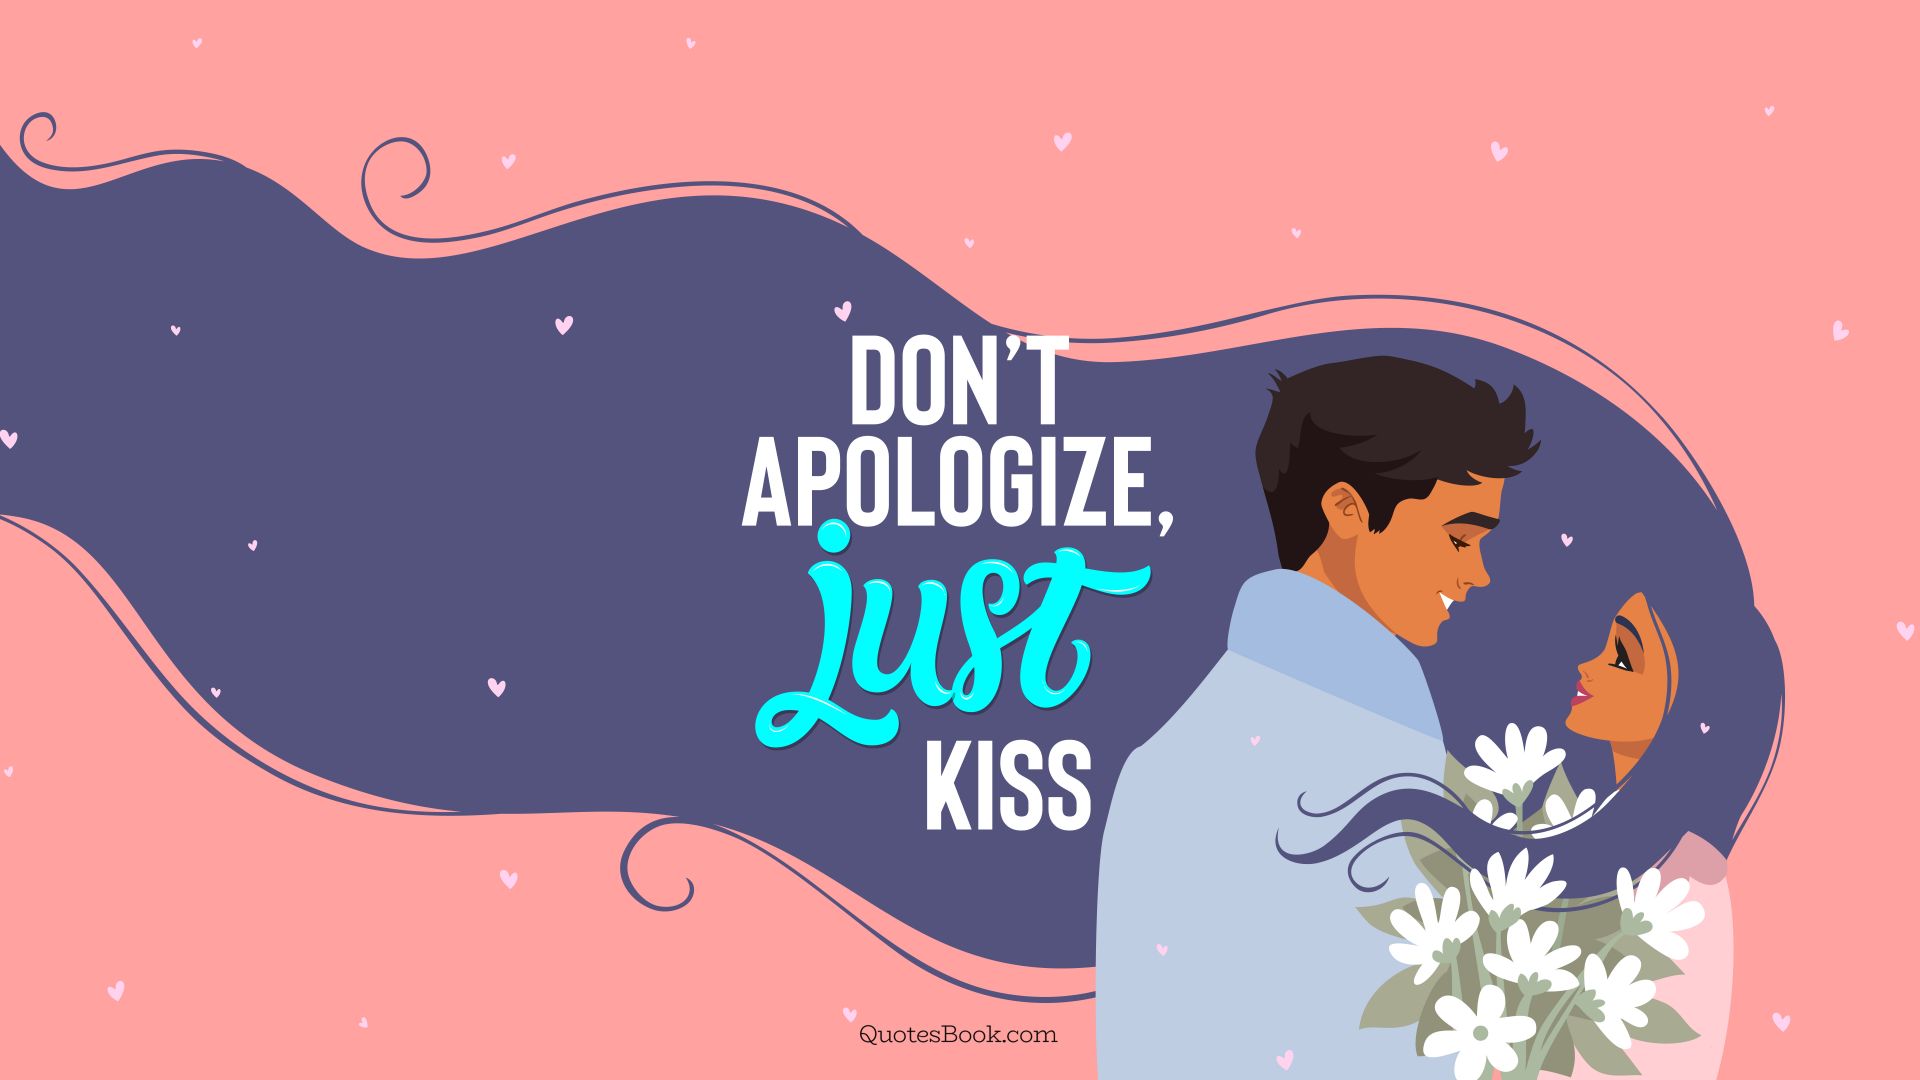 Don’t apologize, just kiss. - Quote by QuotesBook